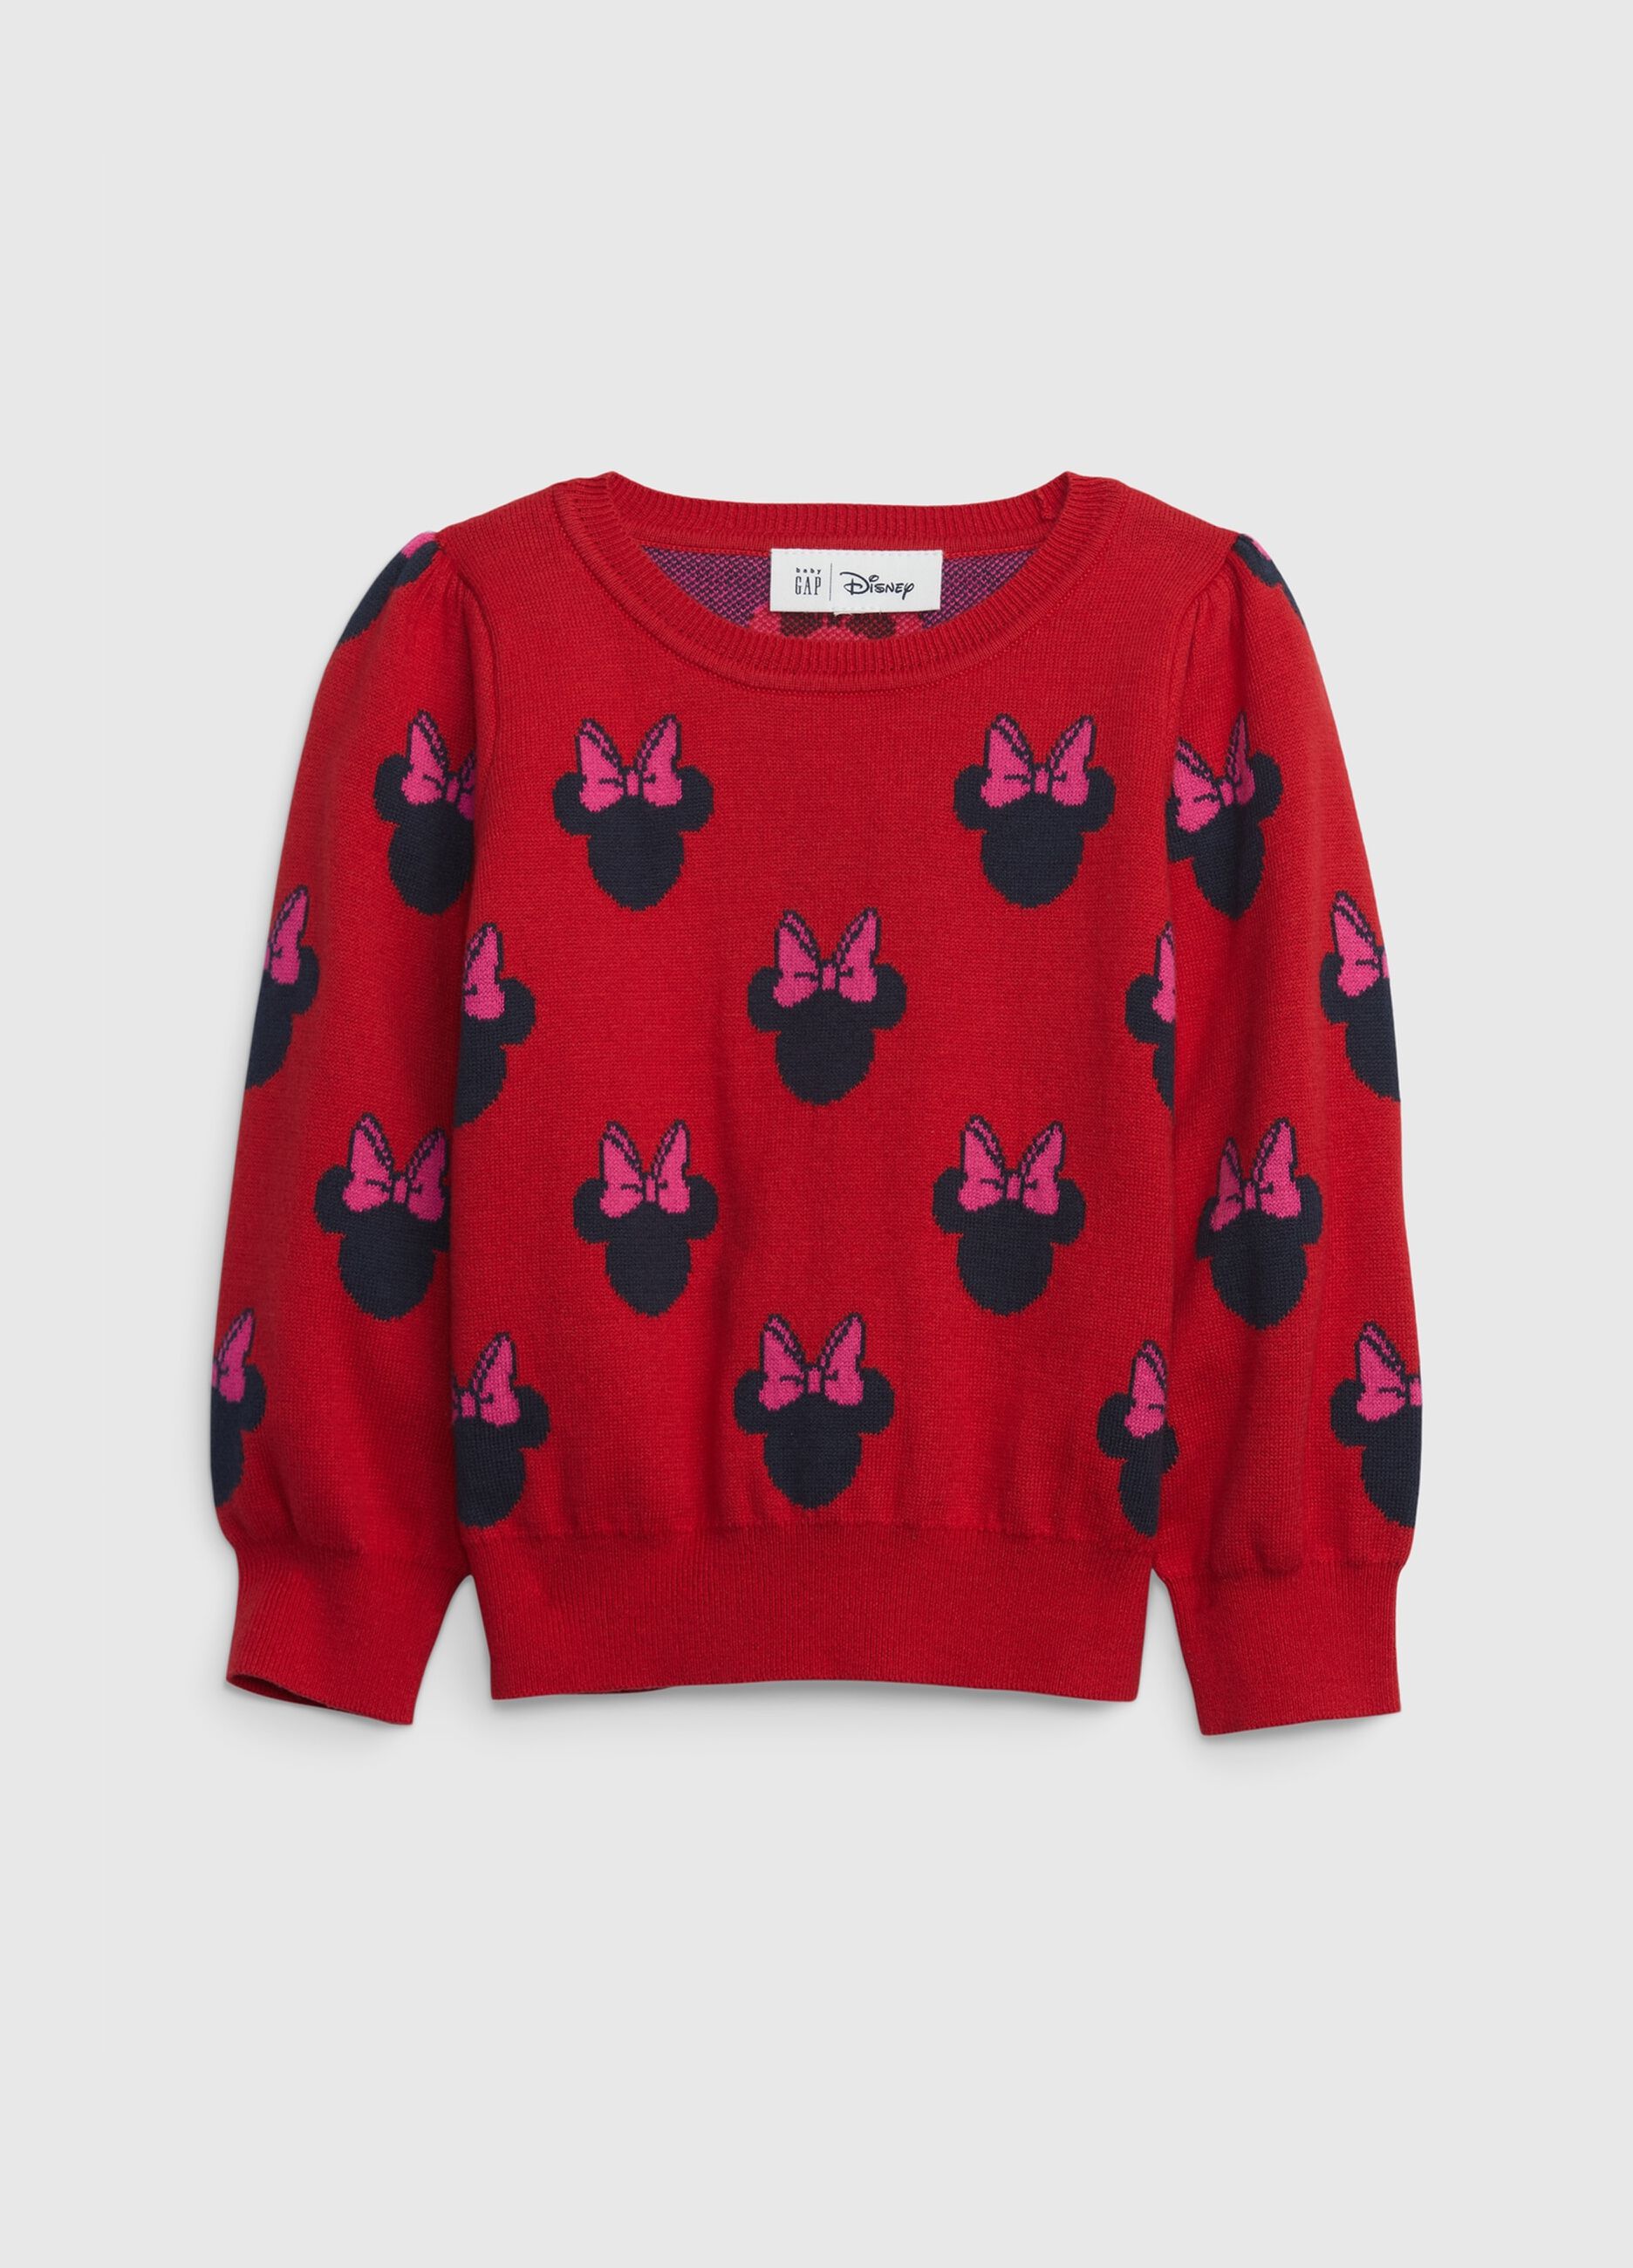 Top with jacquard Disney Minnie Mouse pattern